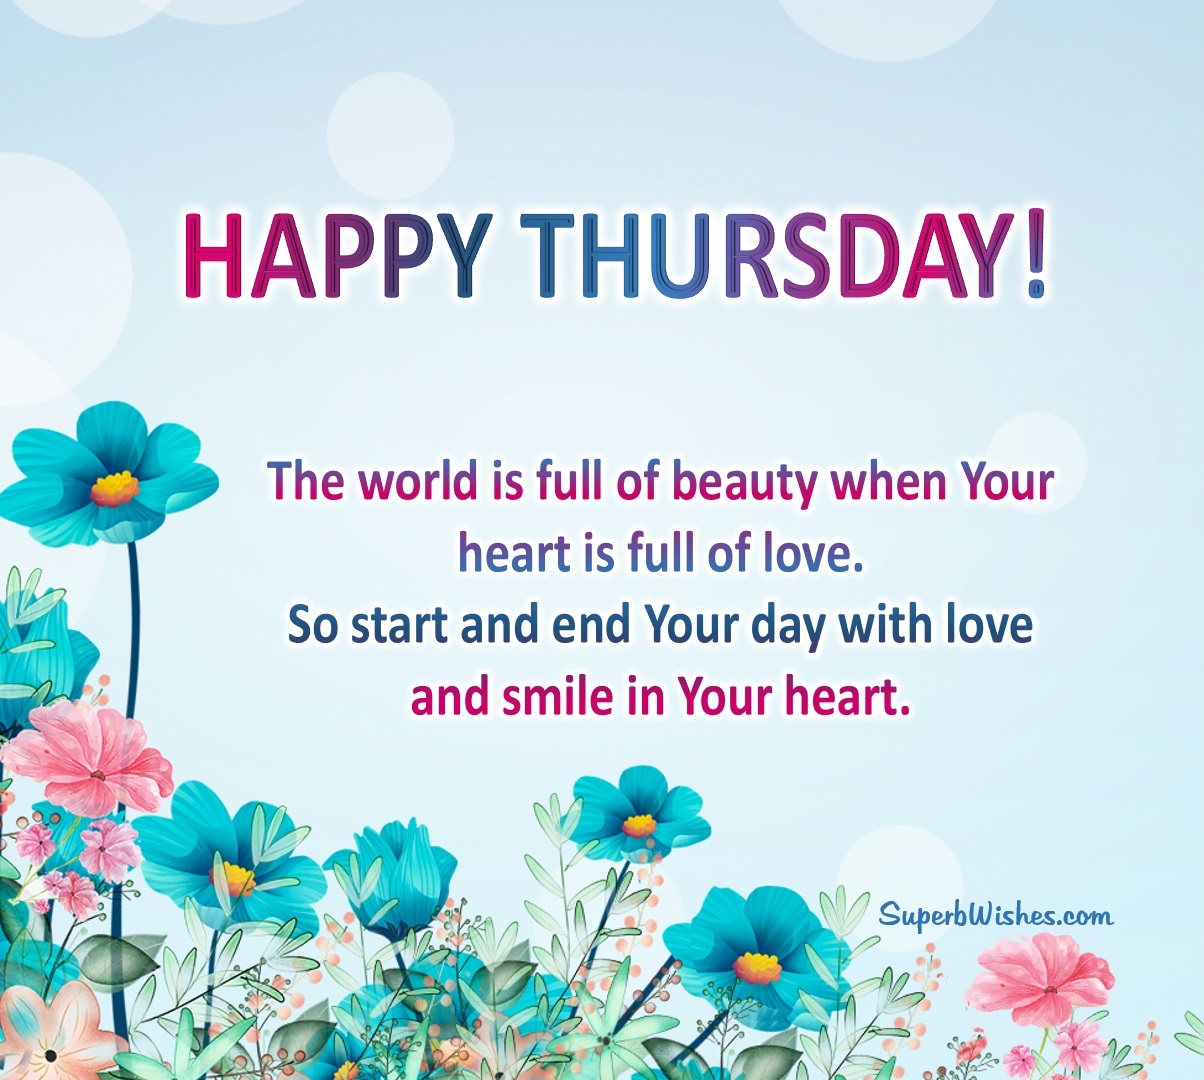 Happy Thursday Images - Start Your Day With Love | SuperbWishes.com